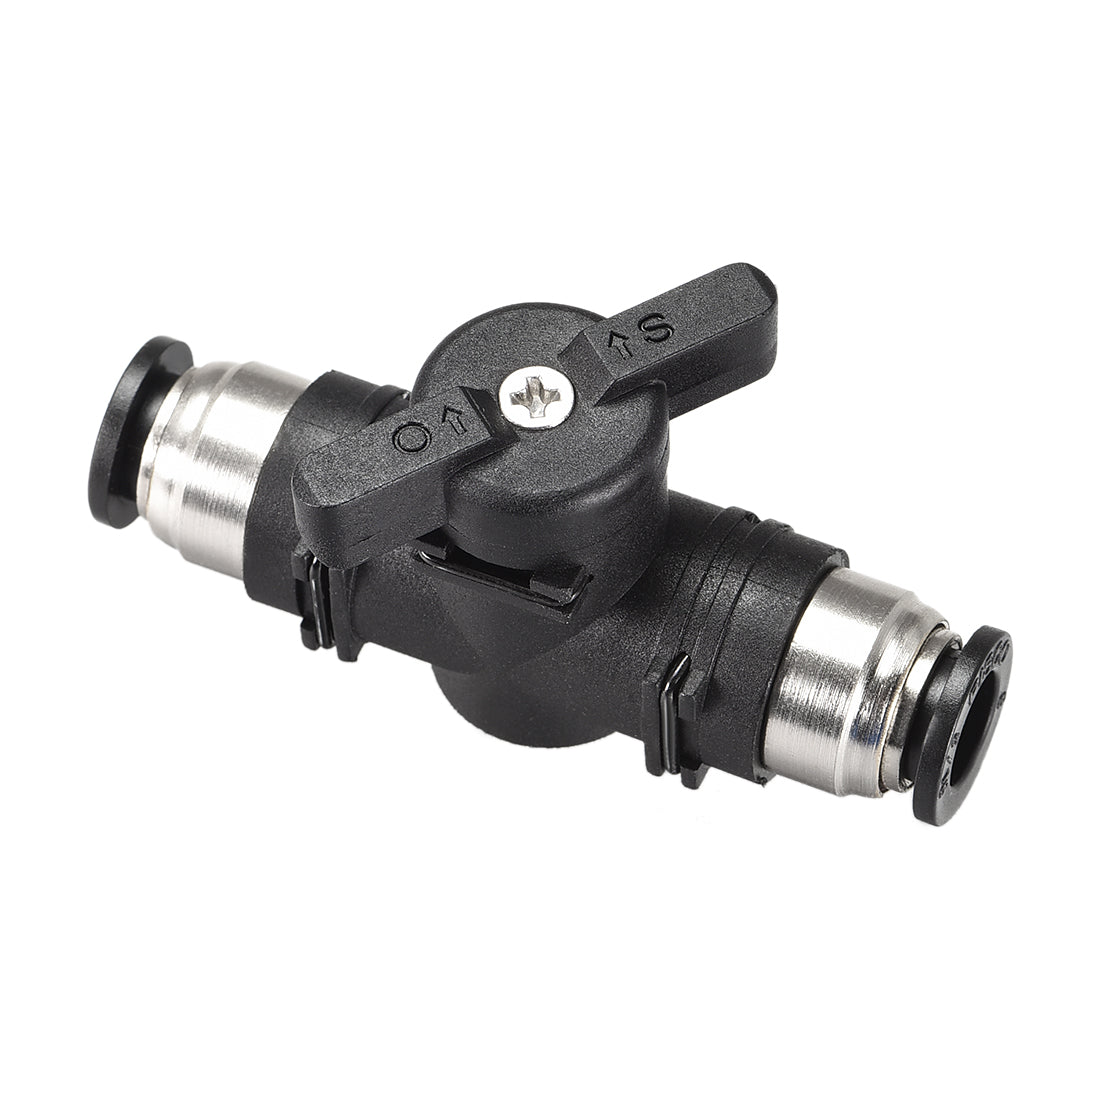 uxcell Uxcell Pneumatic Ball Valve, Push to Connect, 8mm Inner Diameter, for Air Flow Control, Plastic Zinc Alloy Black